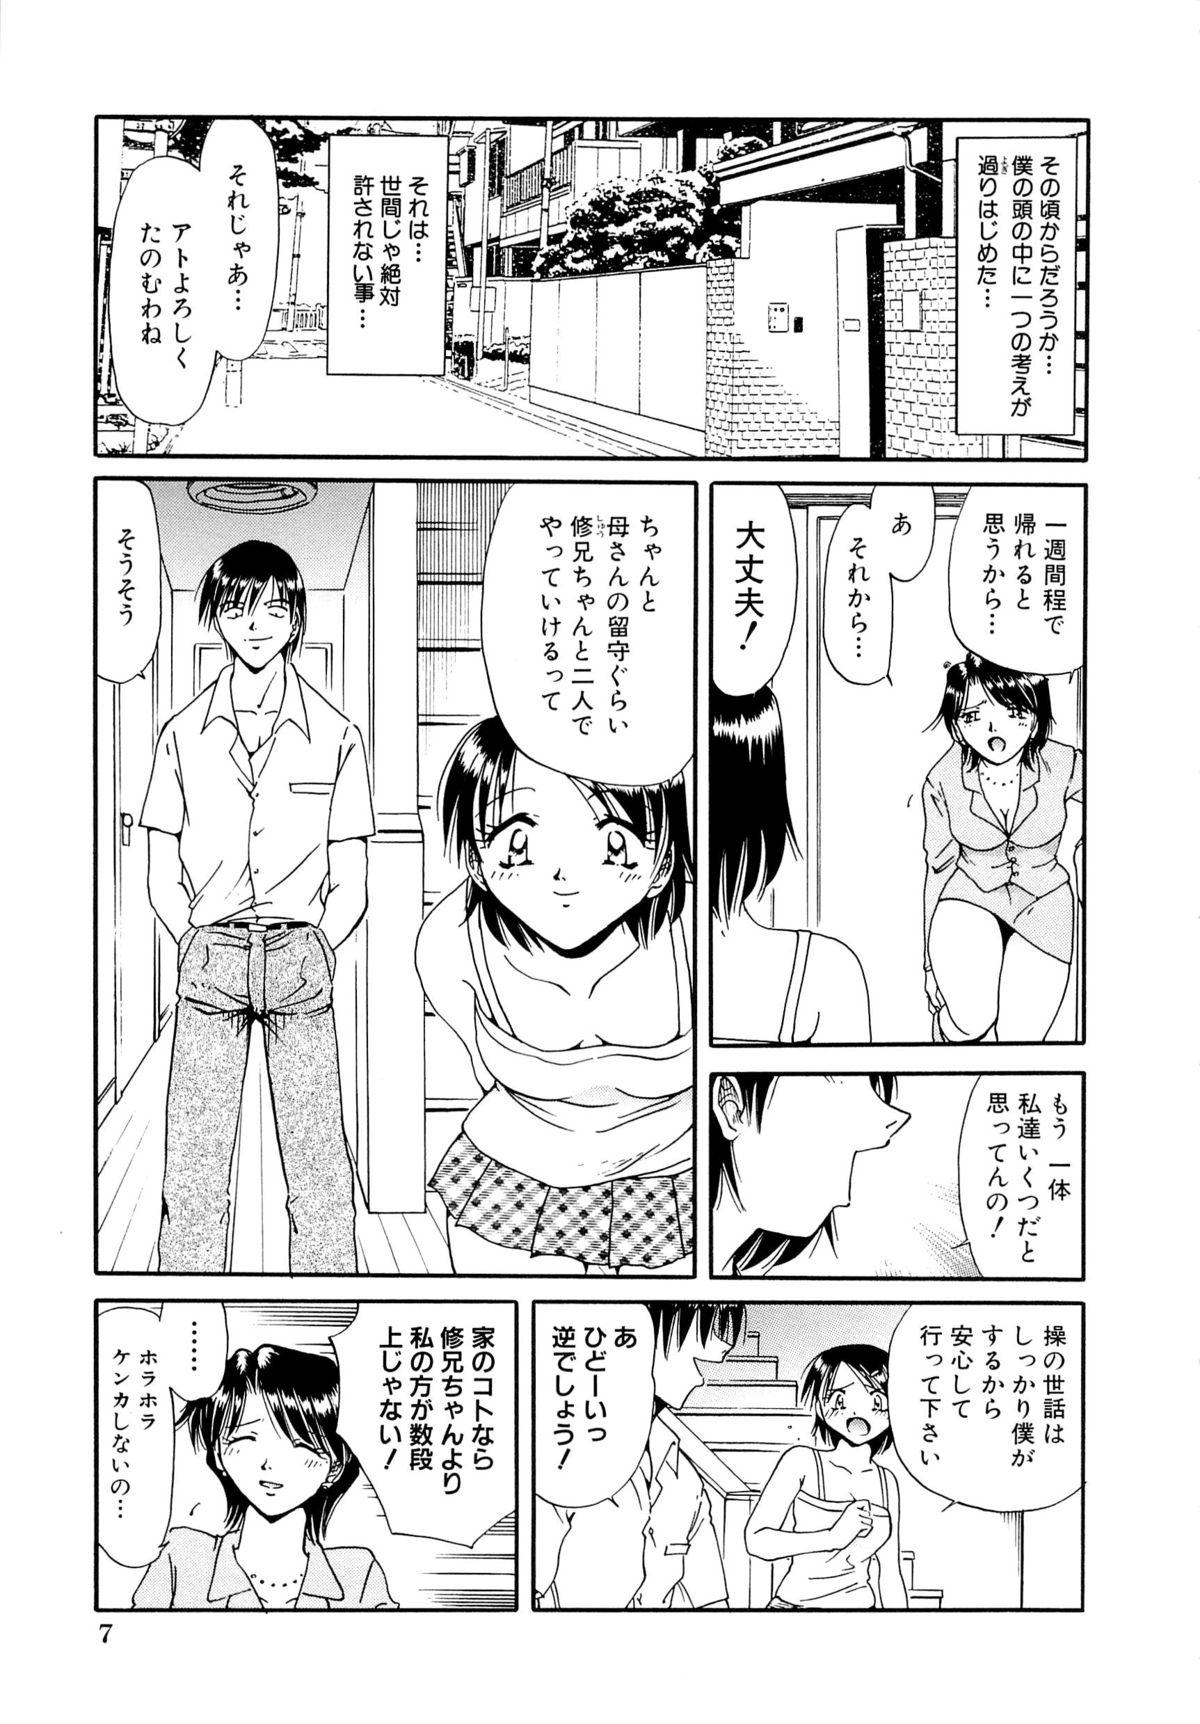 Dildo Fucking Gokuchuu Soukan - Have Sexual Intercourse In Jail Clothed Sex - Page 10